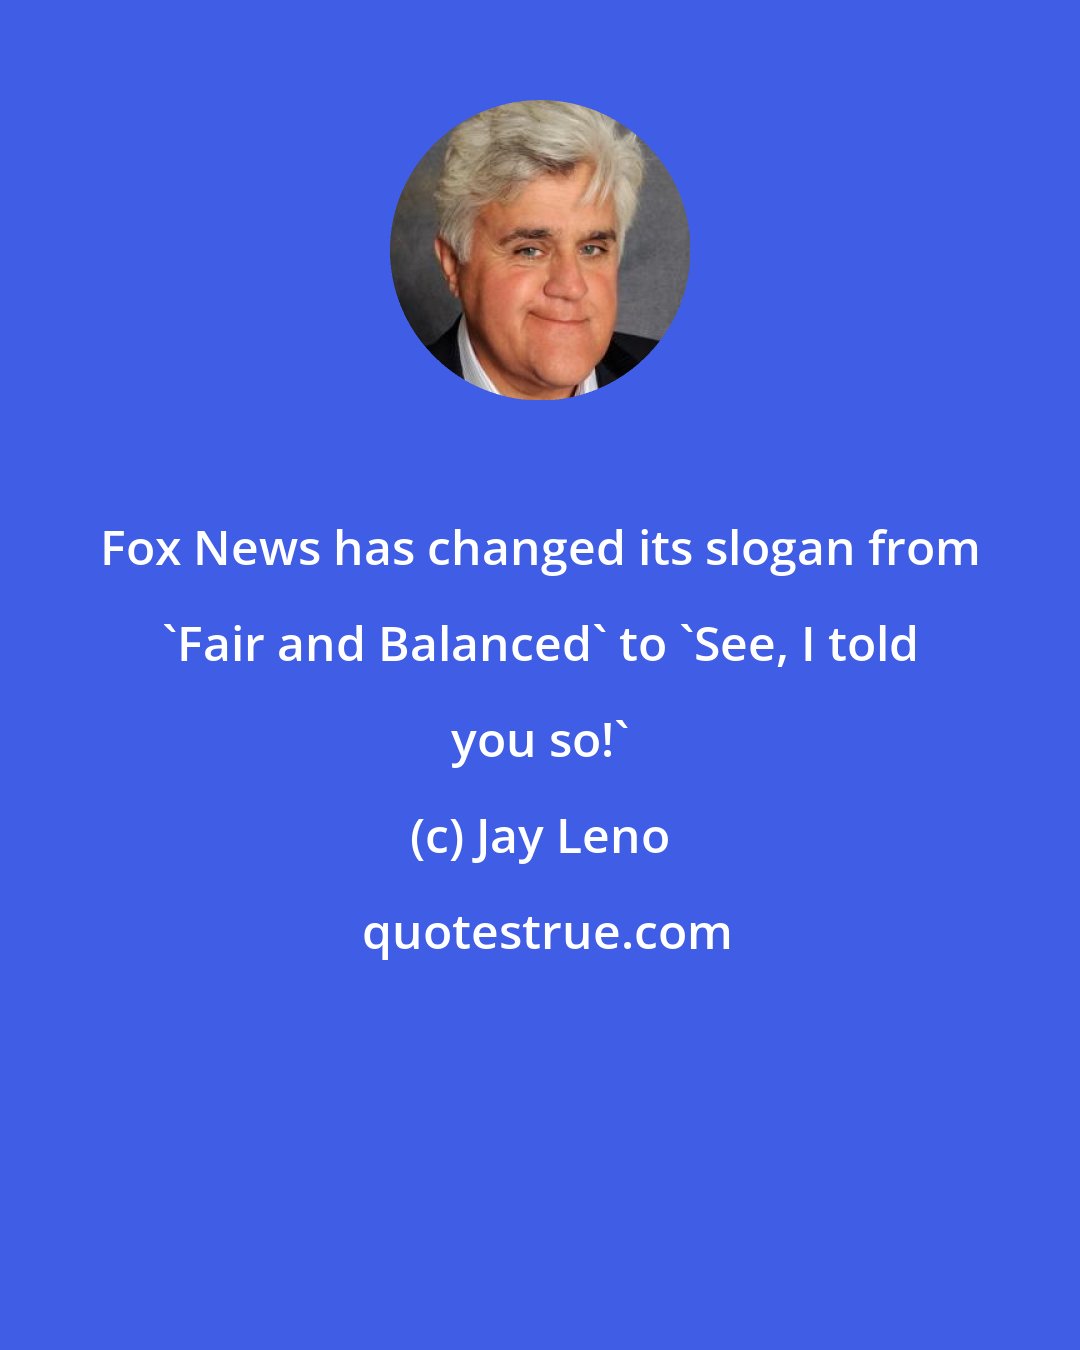 Jay Leno: Fox News has changed its slogan from 'Fair and Balanced' to 'See, I told you so!'